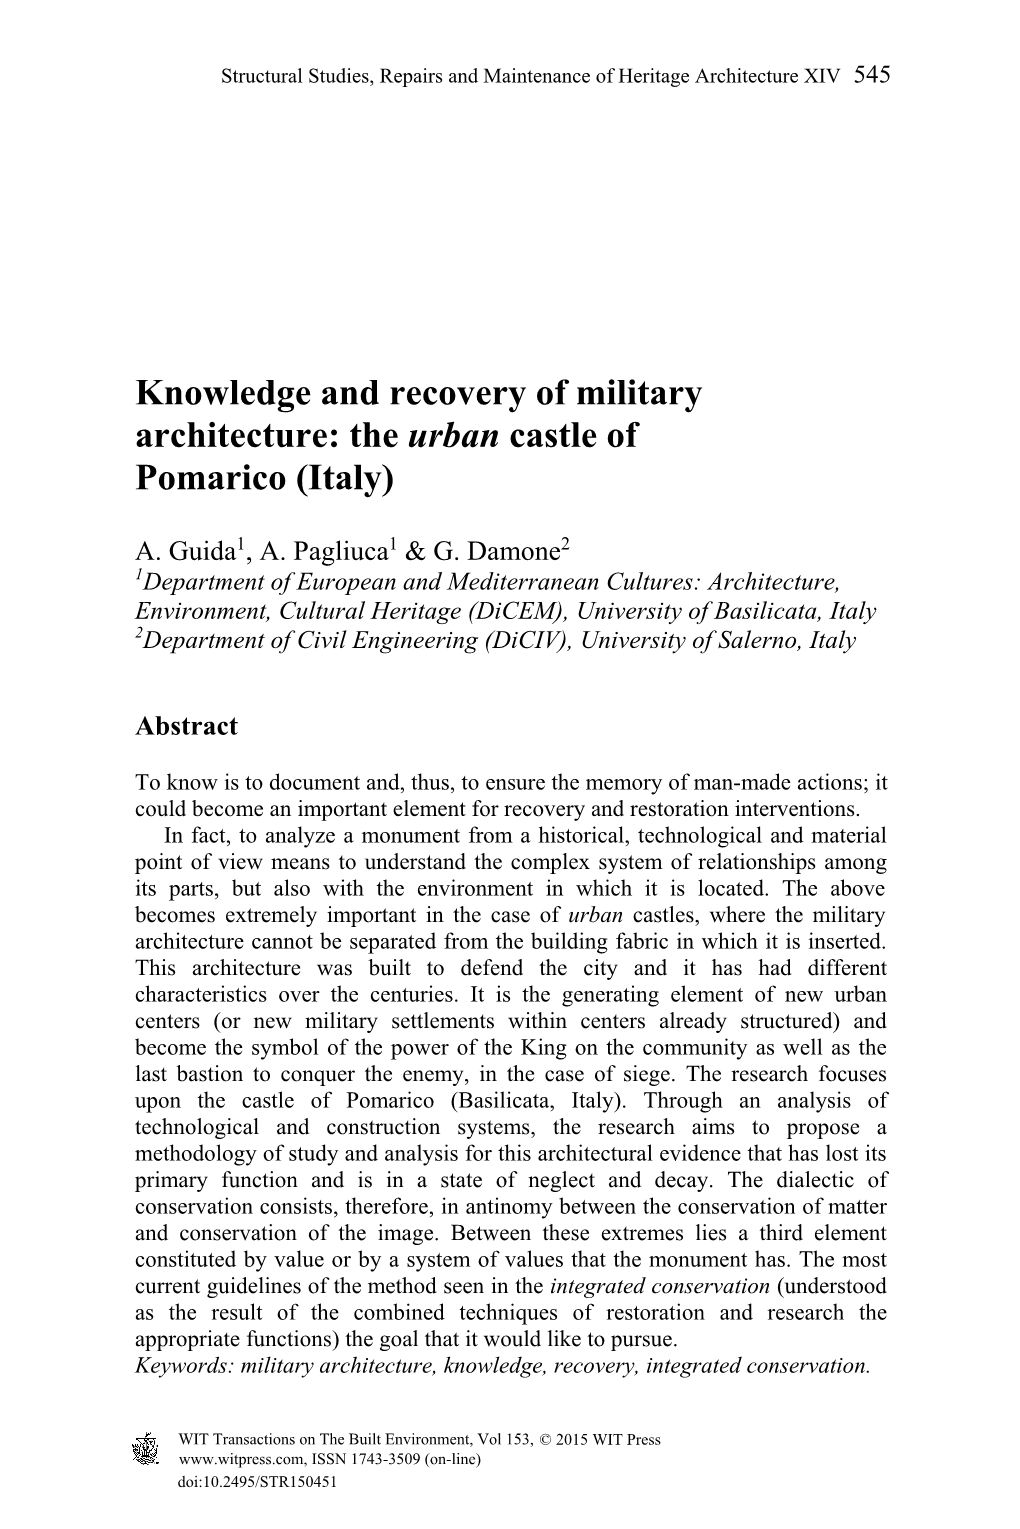 Knowledge and Recovery of Military Architecture: the Urban Castle of Pomarico (Italy)